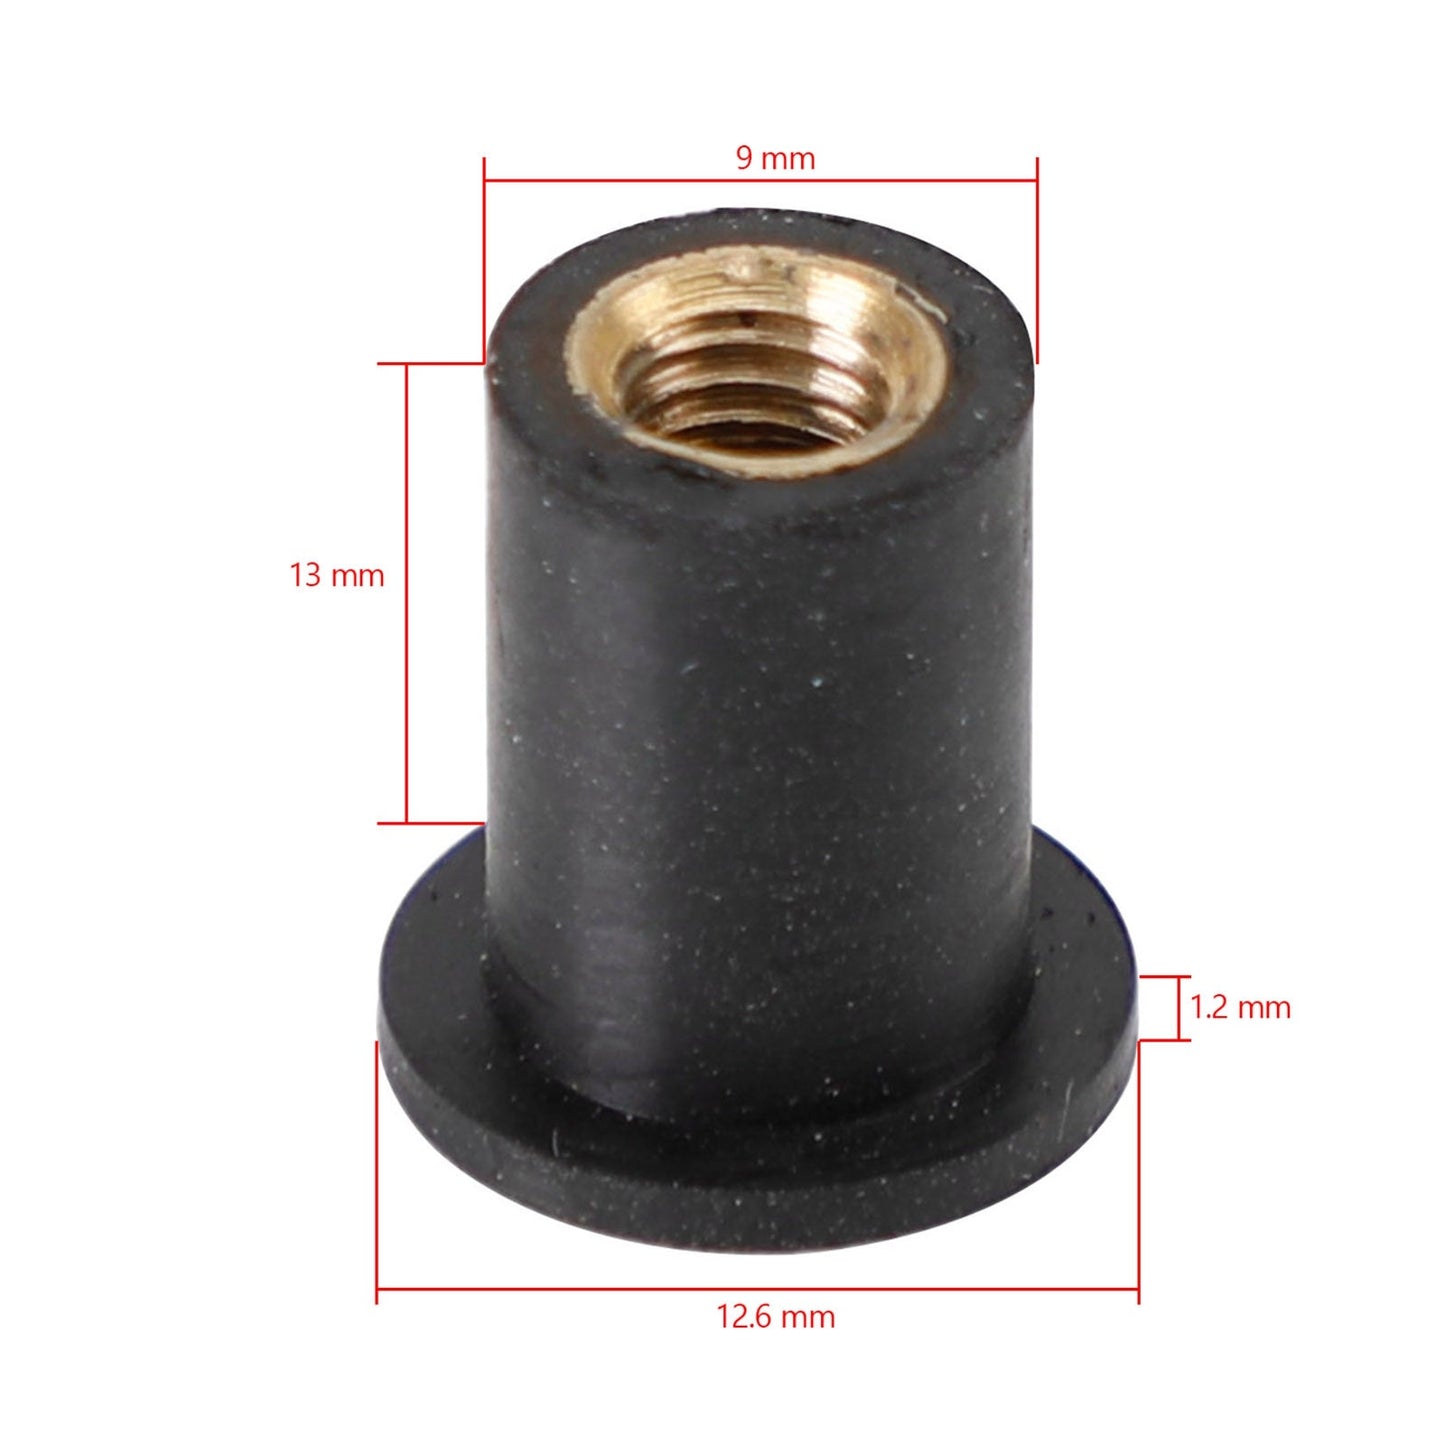 M5 Rubber Well Nuts Wellnuts for Fairing & Screen Fixing Pack of 20 - 10mm Hole